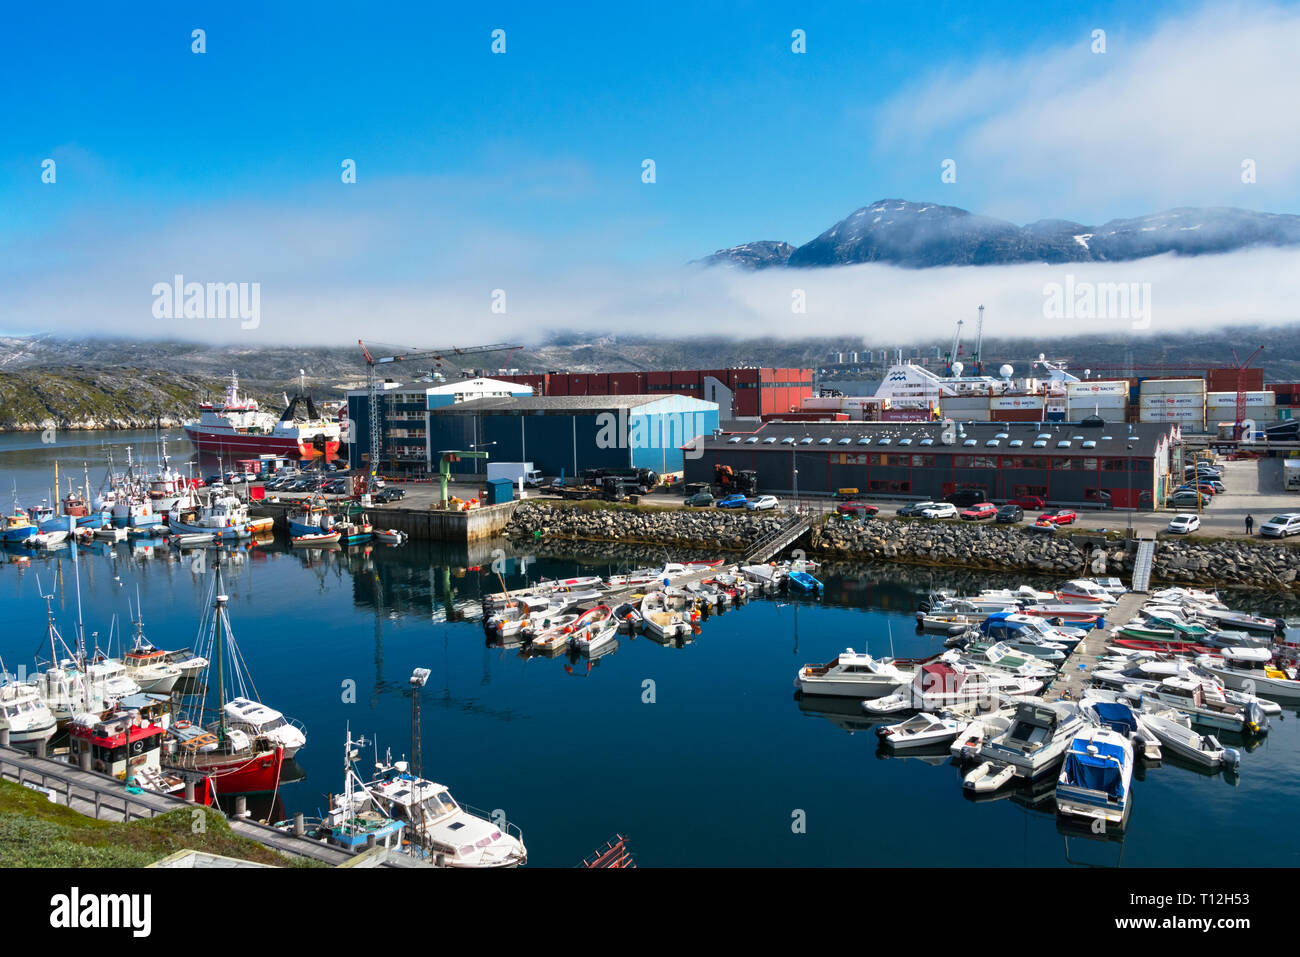 Fishing boats in the colonial harbor, Nuuk, Greenland Stock Photo